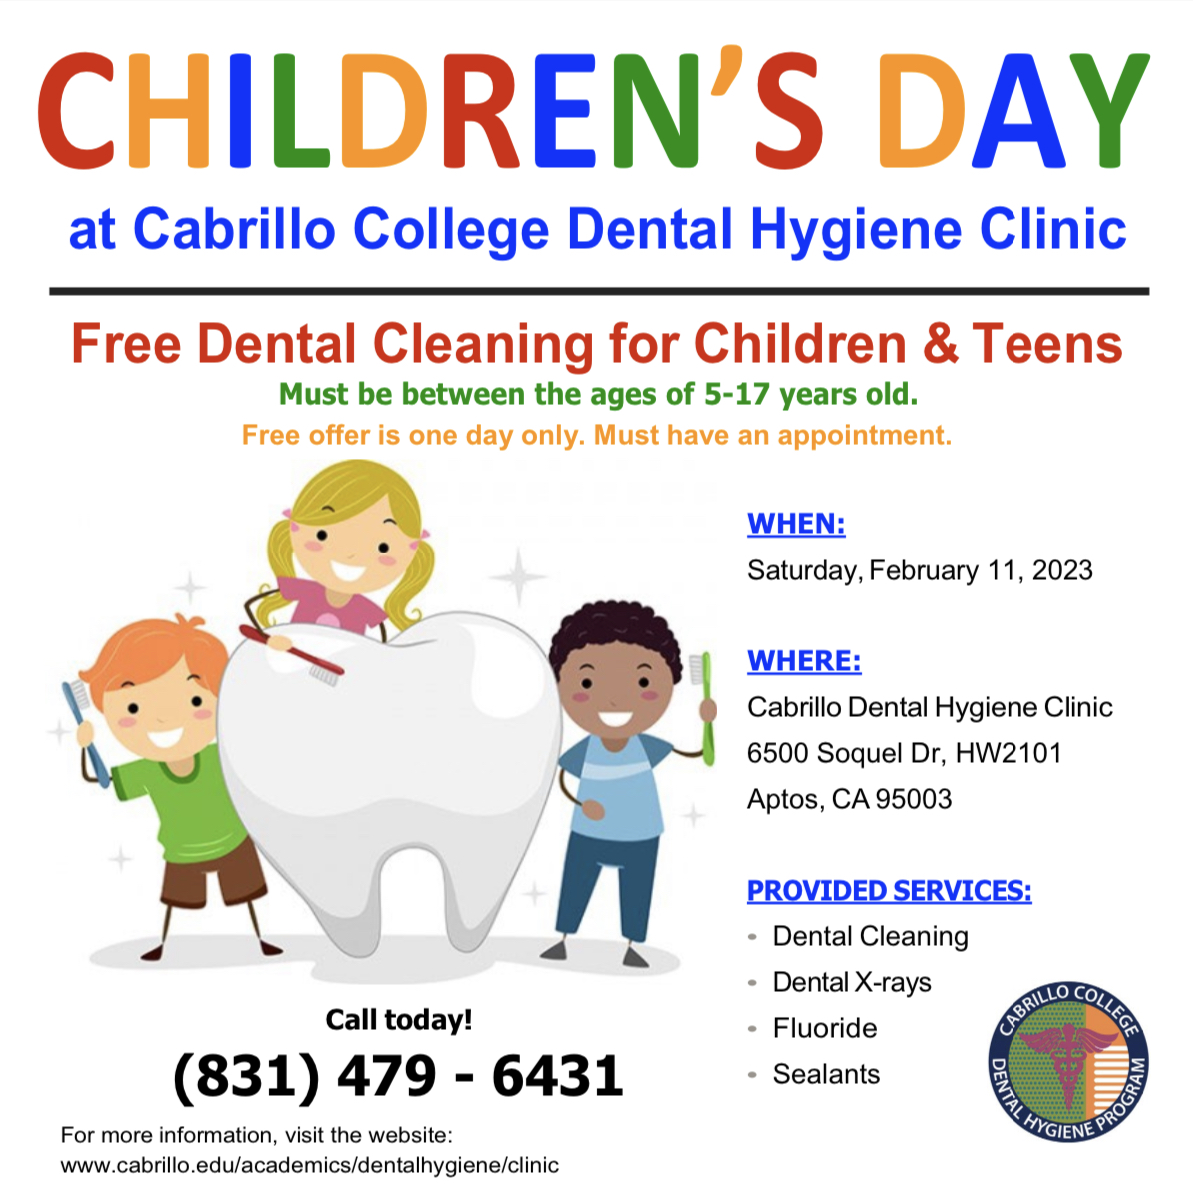 Free Dental Care for your children